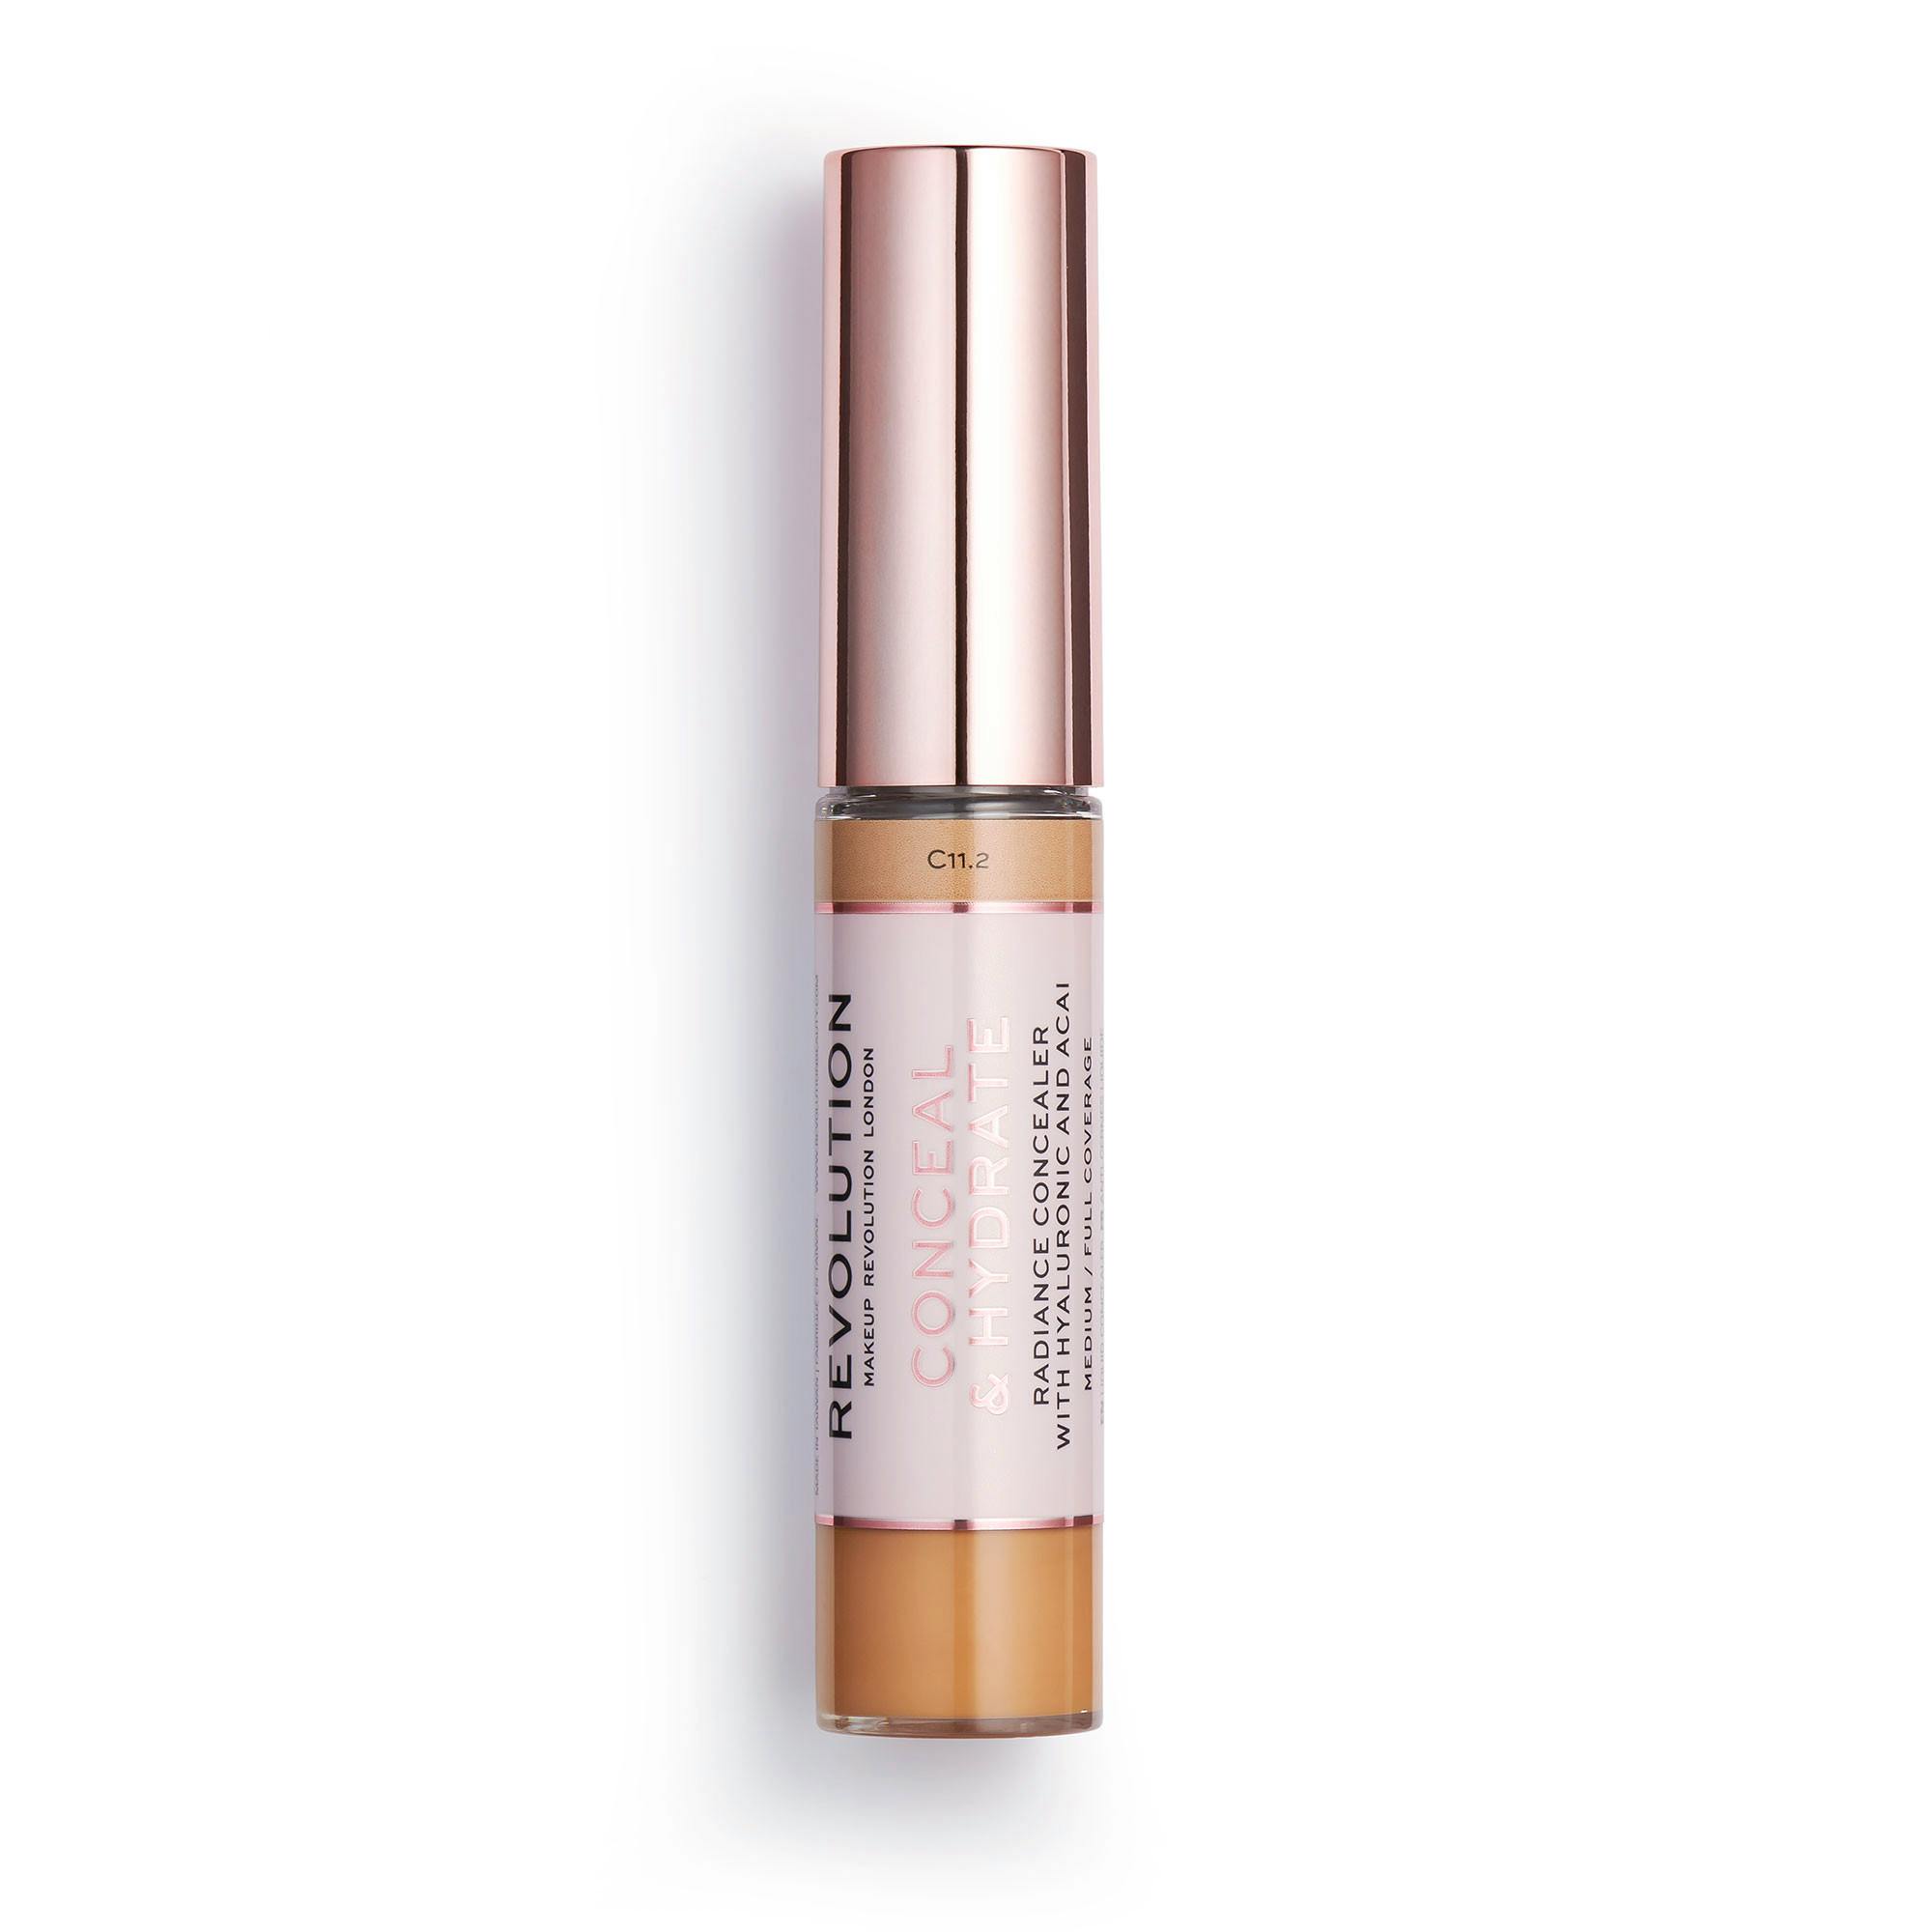 Revolution Conceal and Hydrate Concealer C11.2 g - 59.95 kr